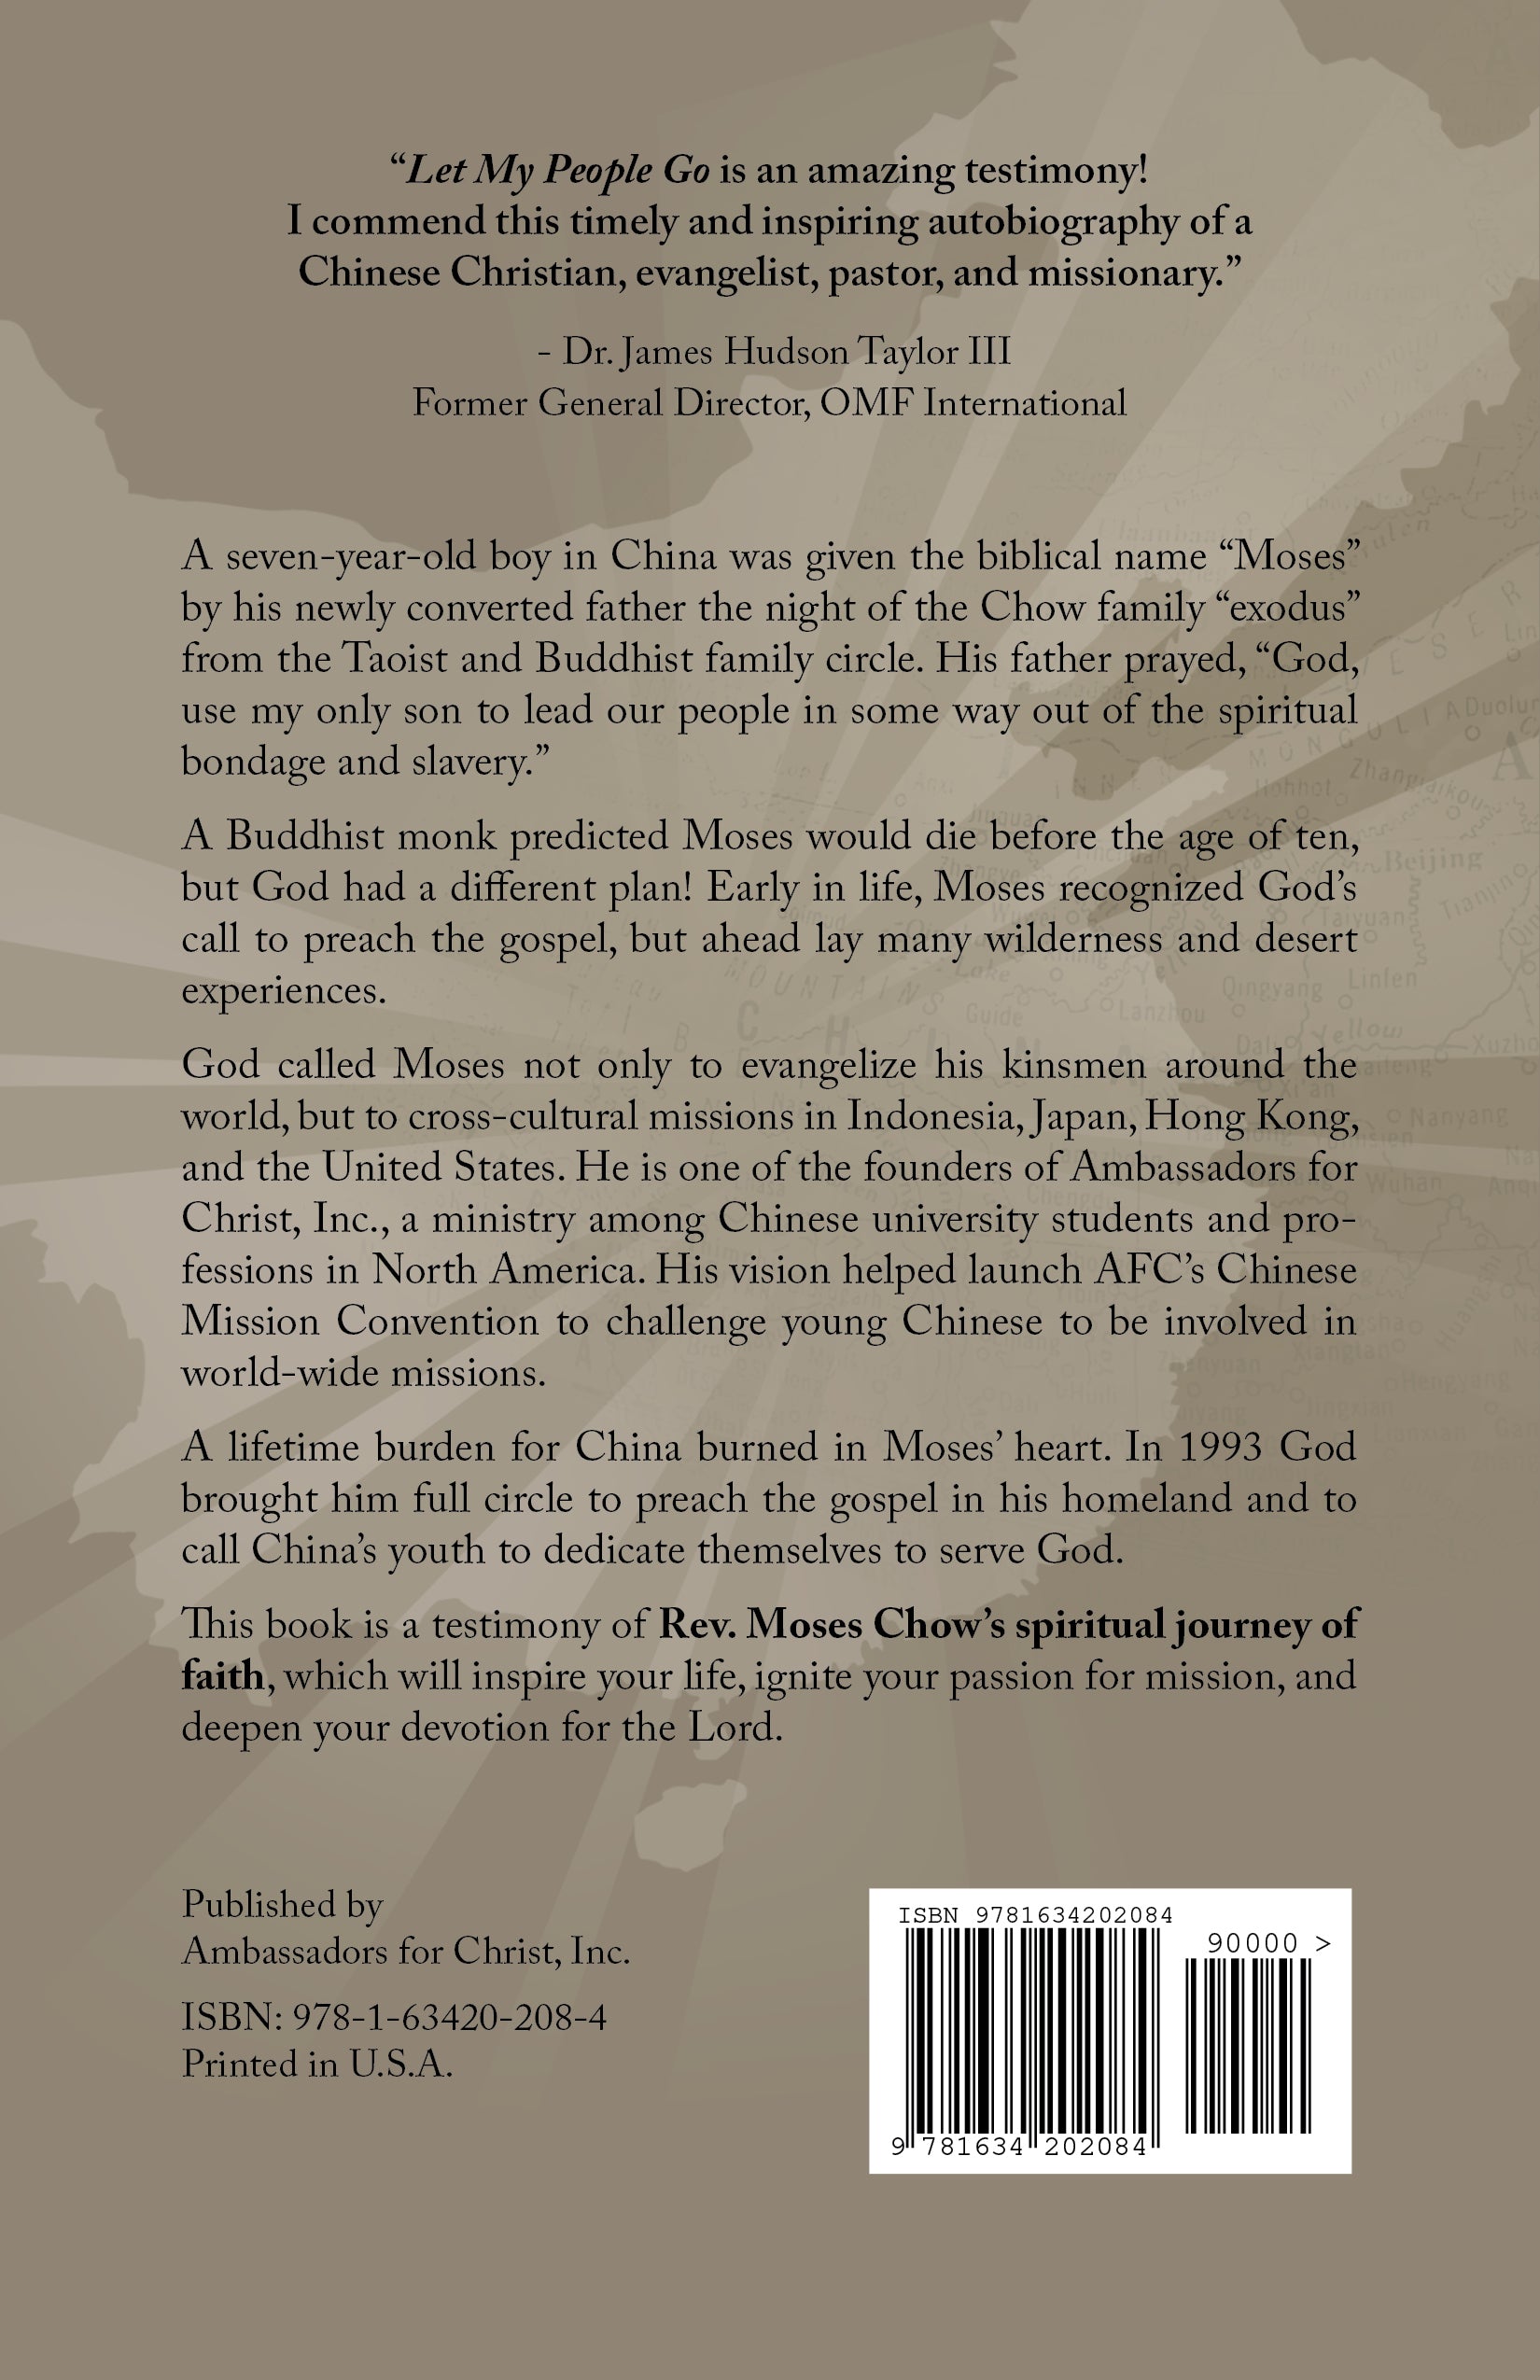 Let My People Go! - Moses Chow's Missionary Journey - English E-book FREE